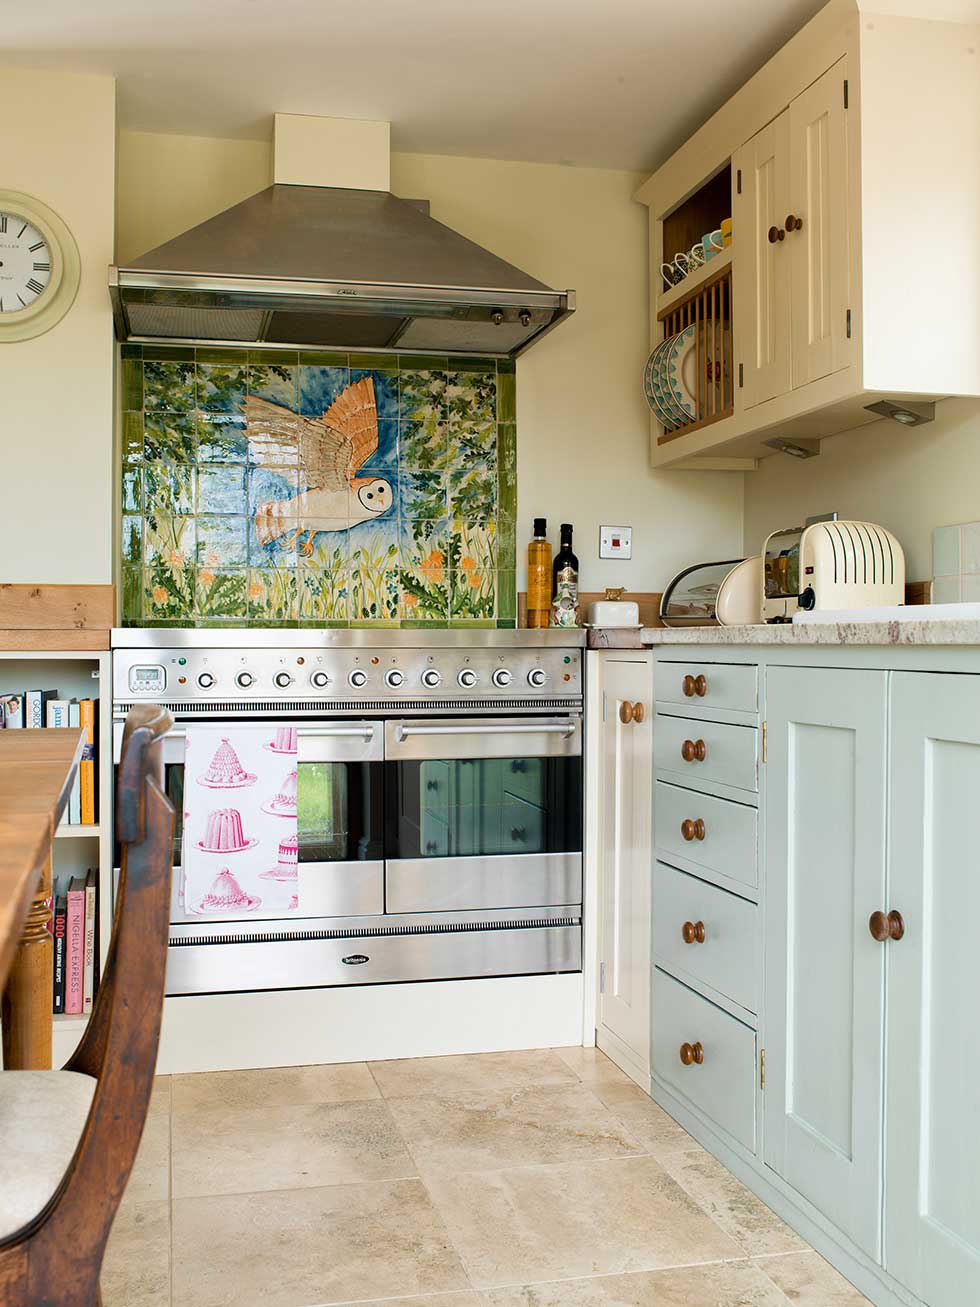 Real home: kitchen extension with vintage appeal | Real Homes